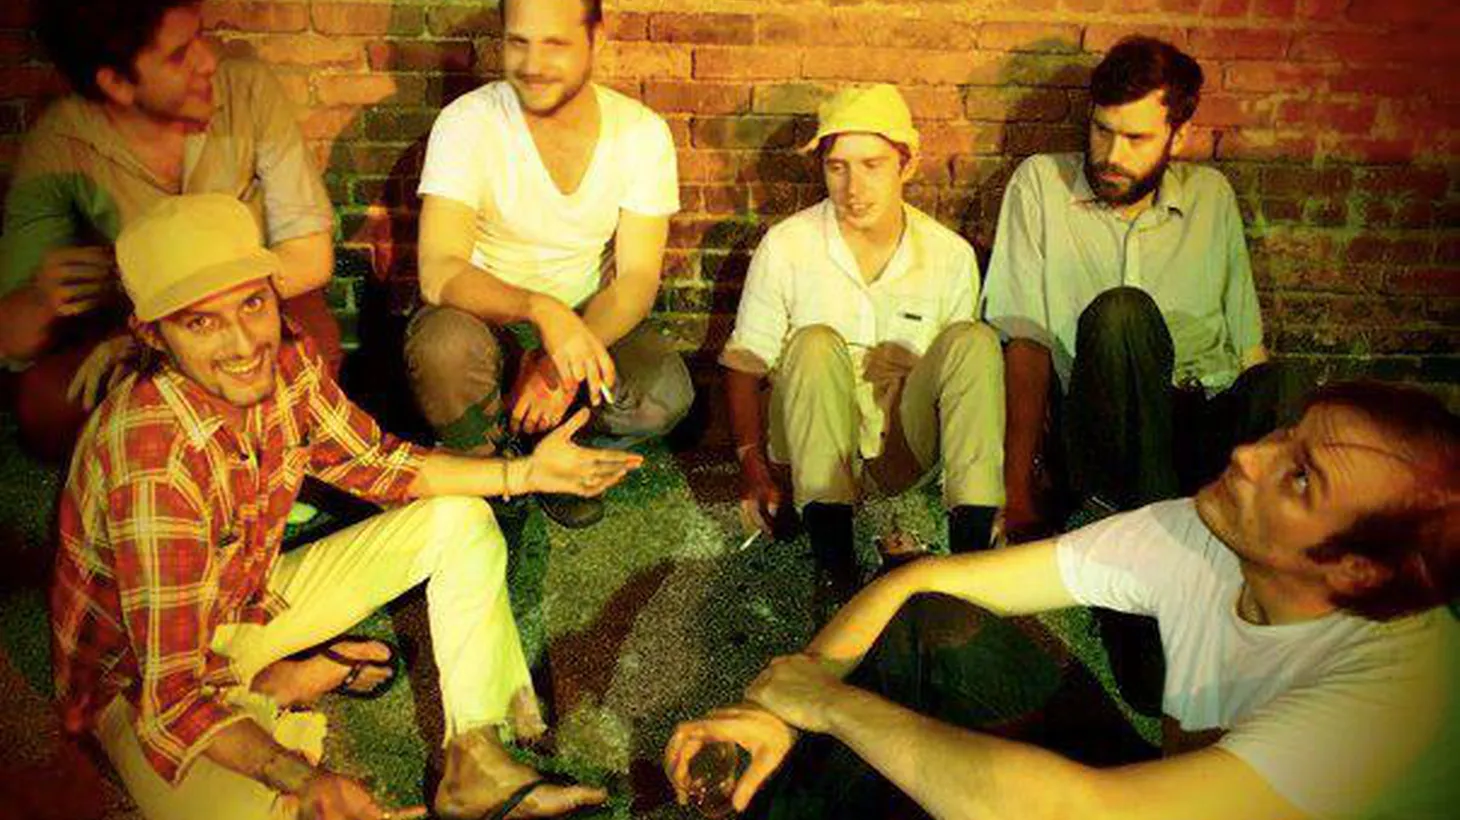 Philly-based band Dr. Dog have embraced a variety of sounds throughout their career from raw, lo-fi rock to melodic guitar-driven pop. They turn up the guitars and let loose...